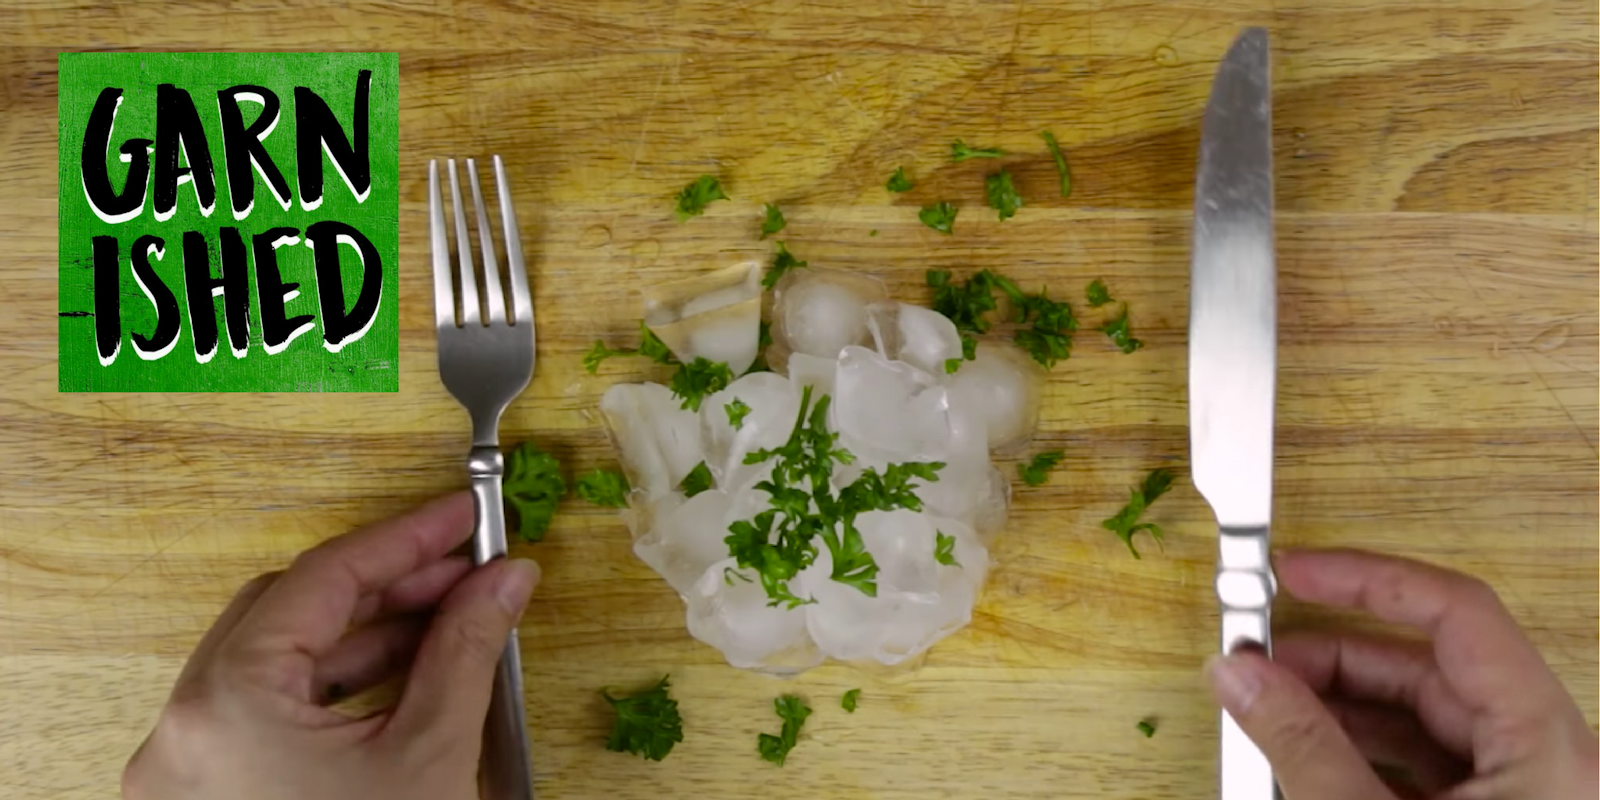 Garnished cooking channel featuring how to make ice.